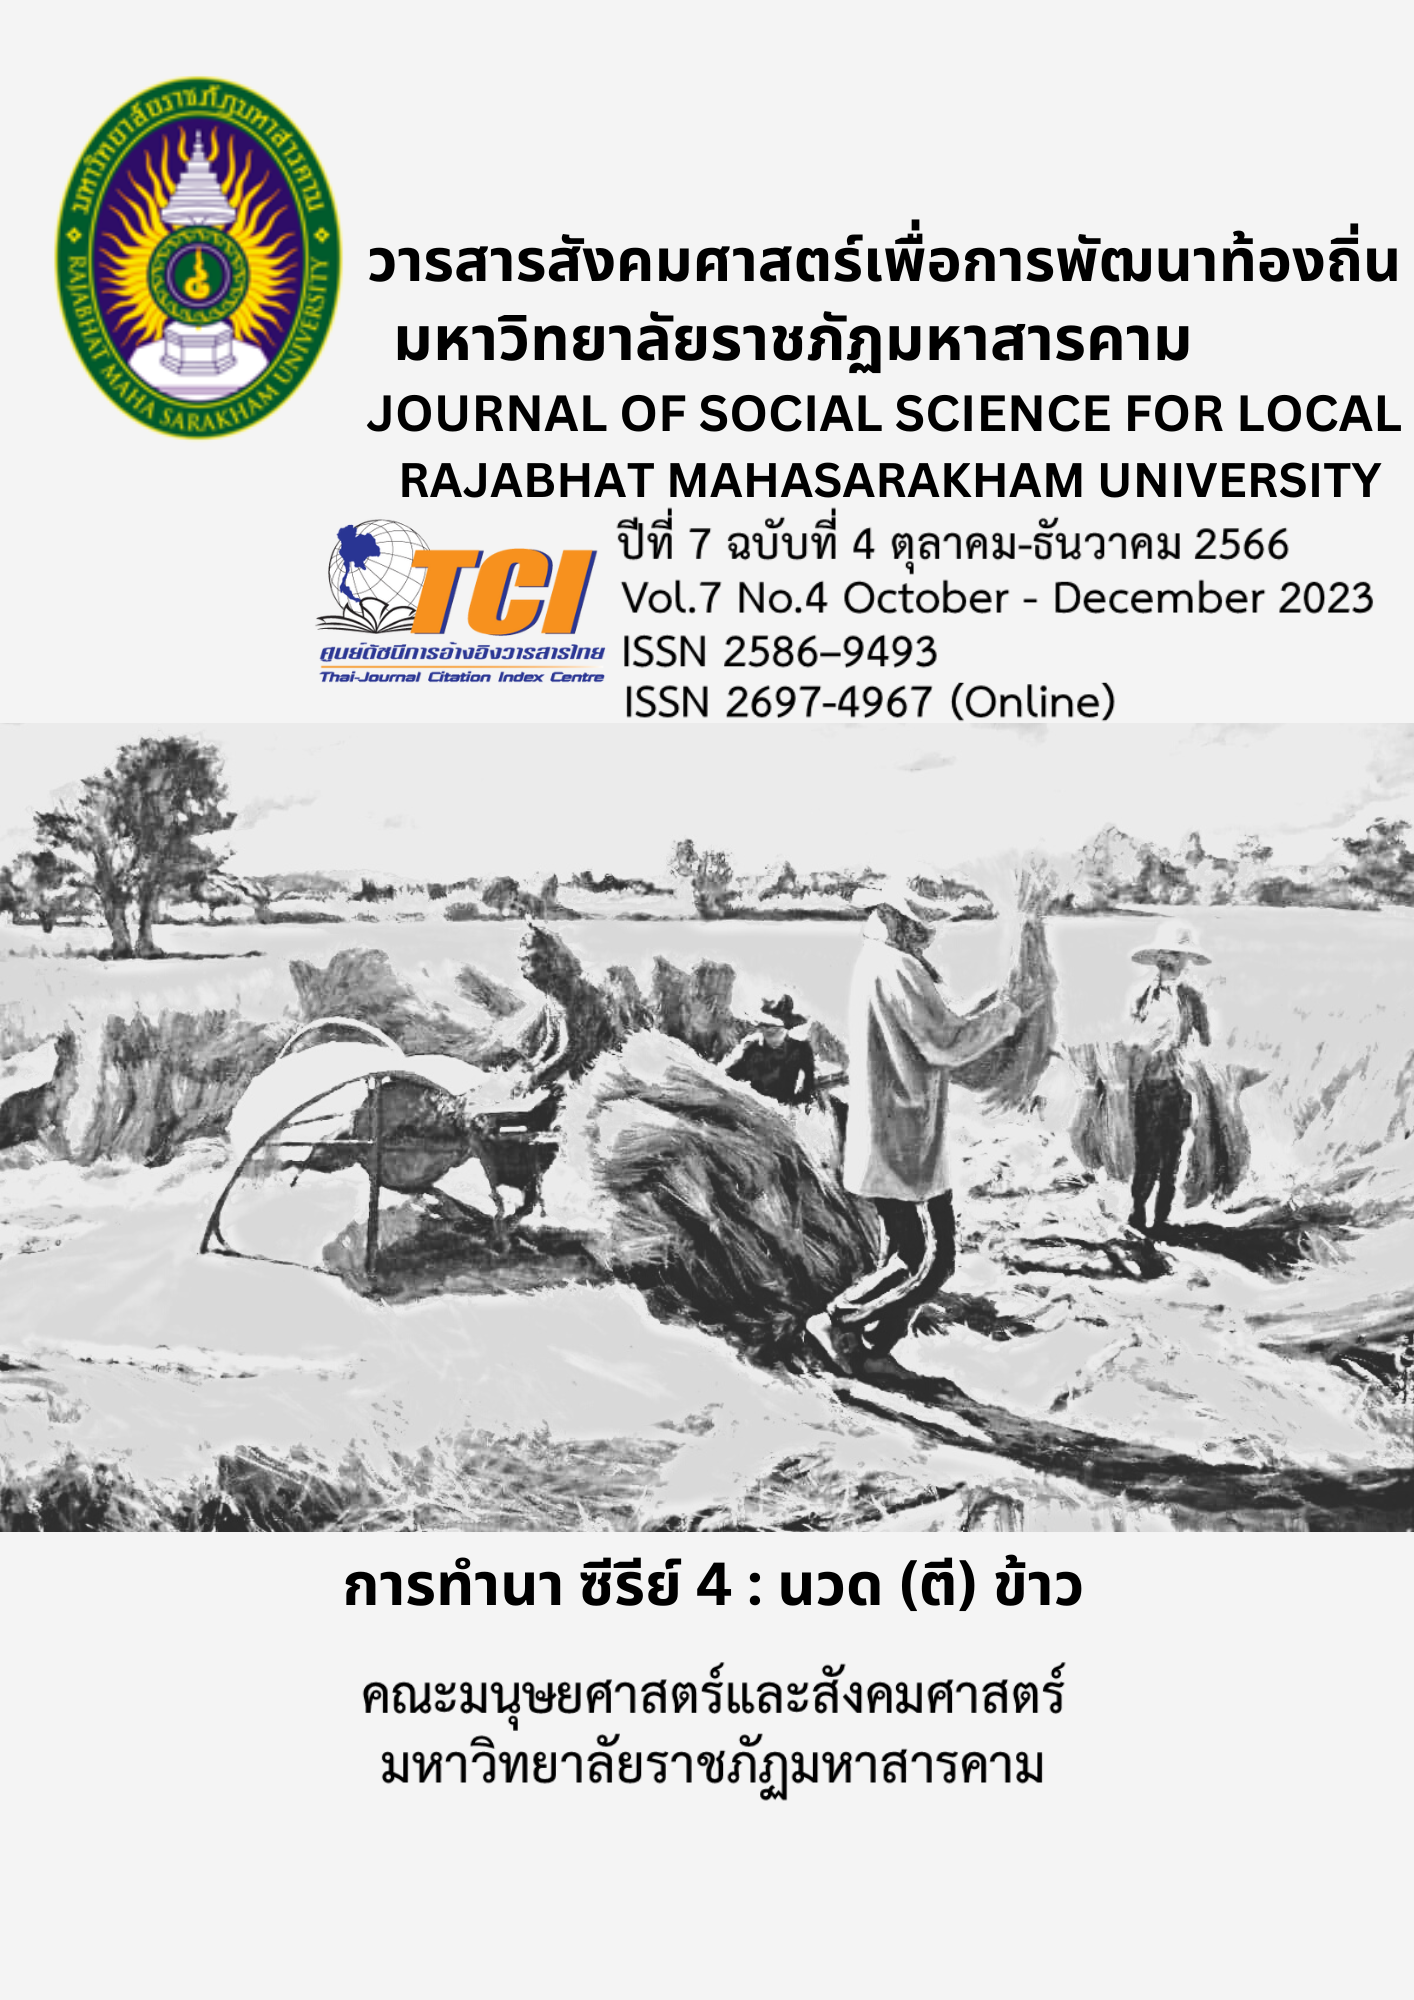 					View Vol. 7 No. 4 (2023): JOURNAL OF SOCIAL SCIENCE FOR LOCAL RAJABHAT MAHASARAKHAM UNIVERSITY
				